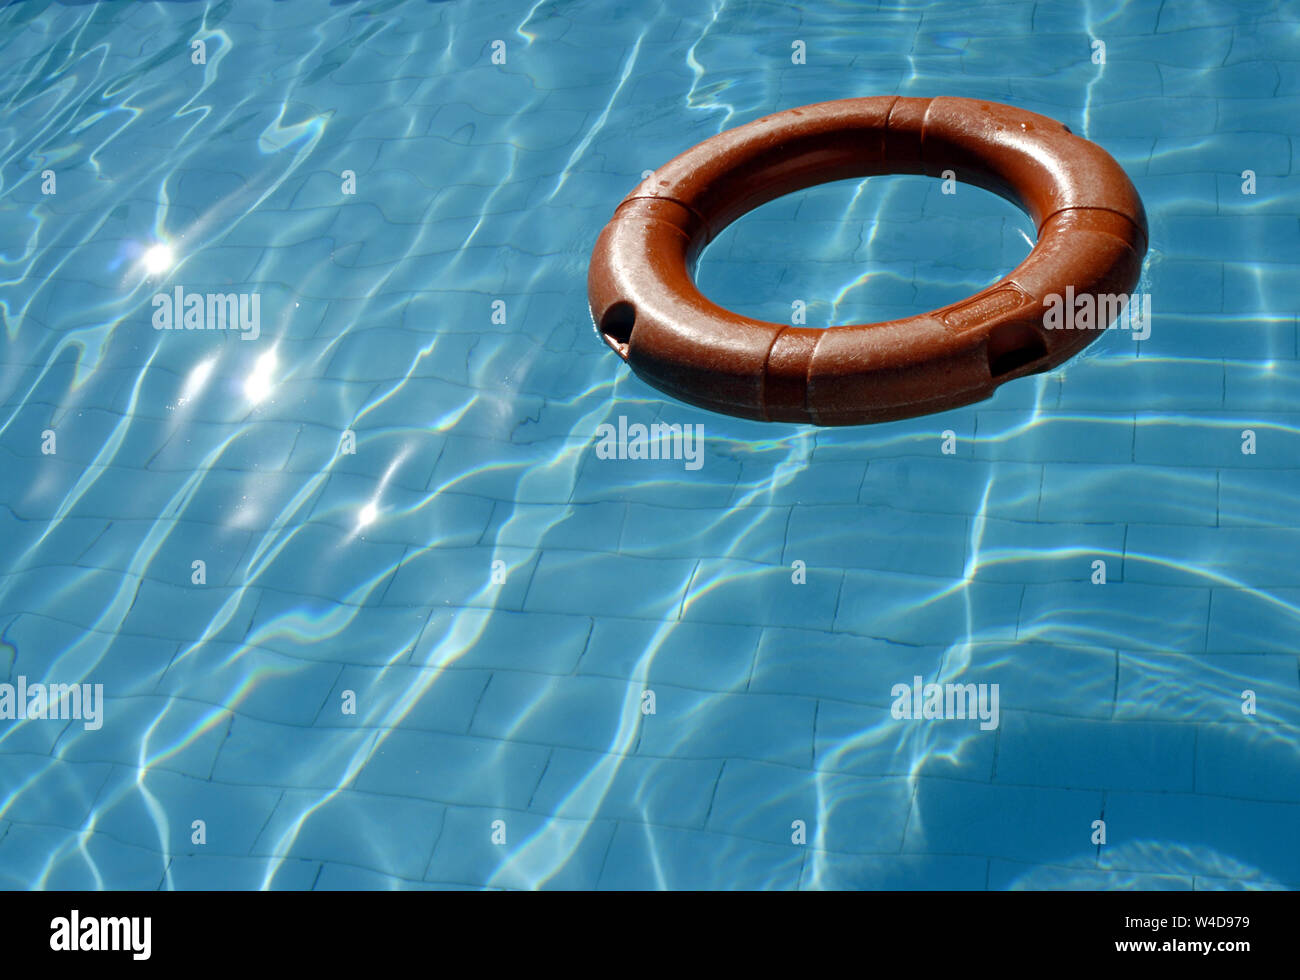 Lifebuoy floating in a swimming pool water Stock Photo